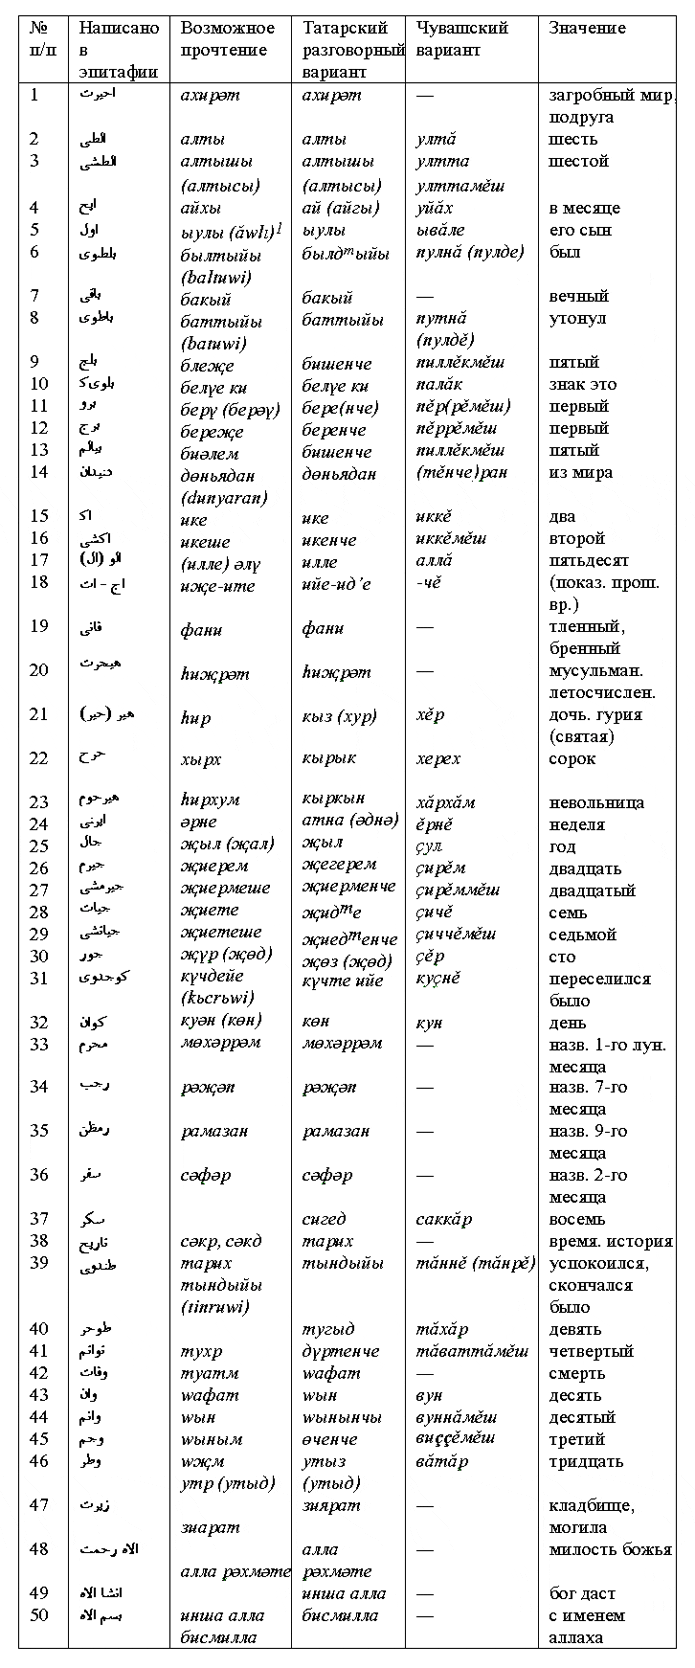 Comparison table of Turkic lexical composition 